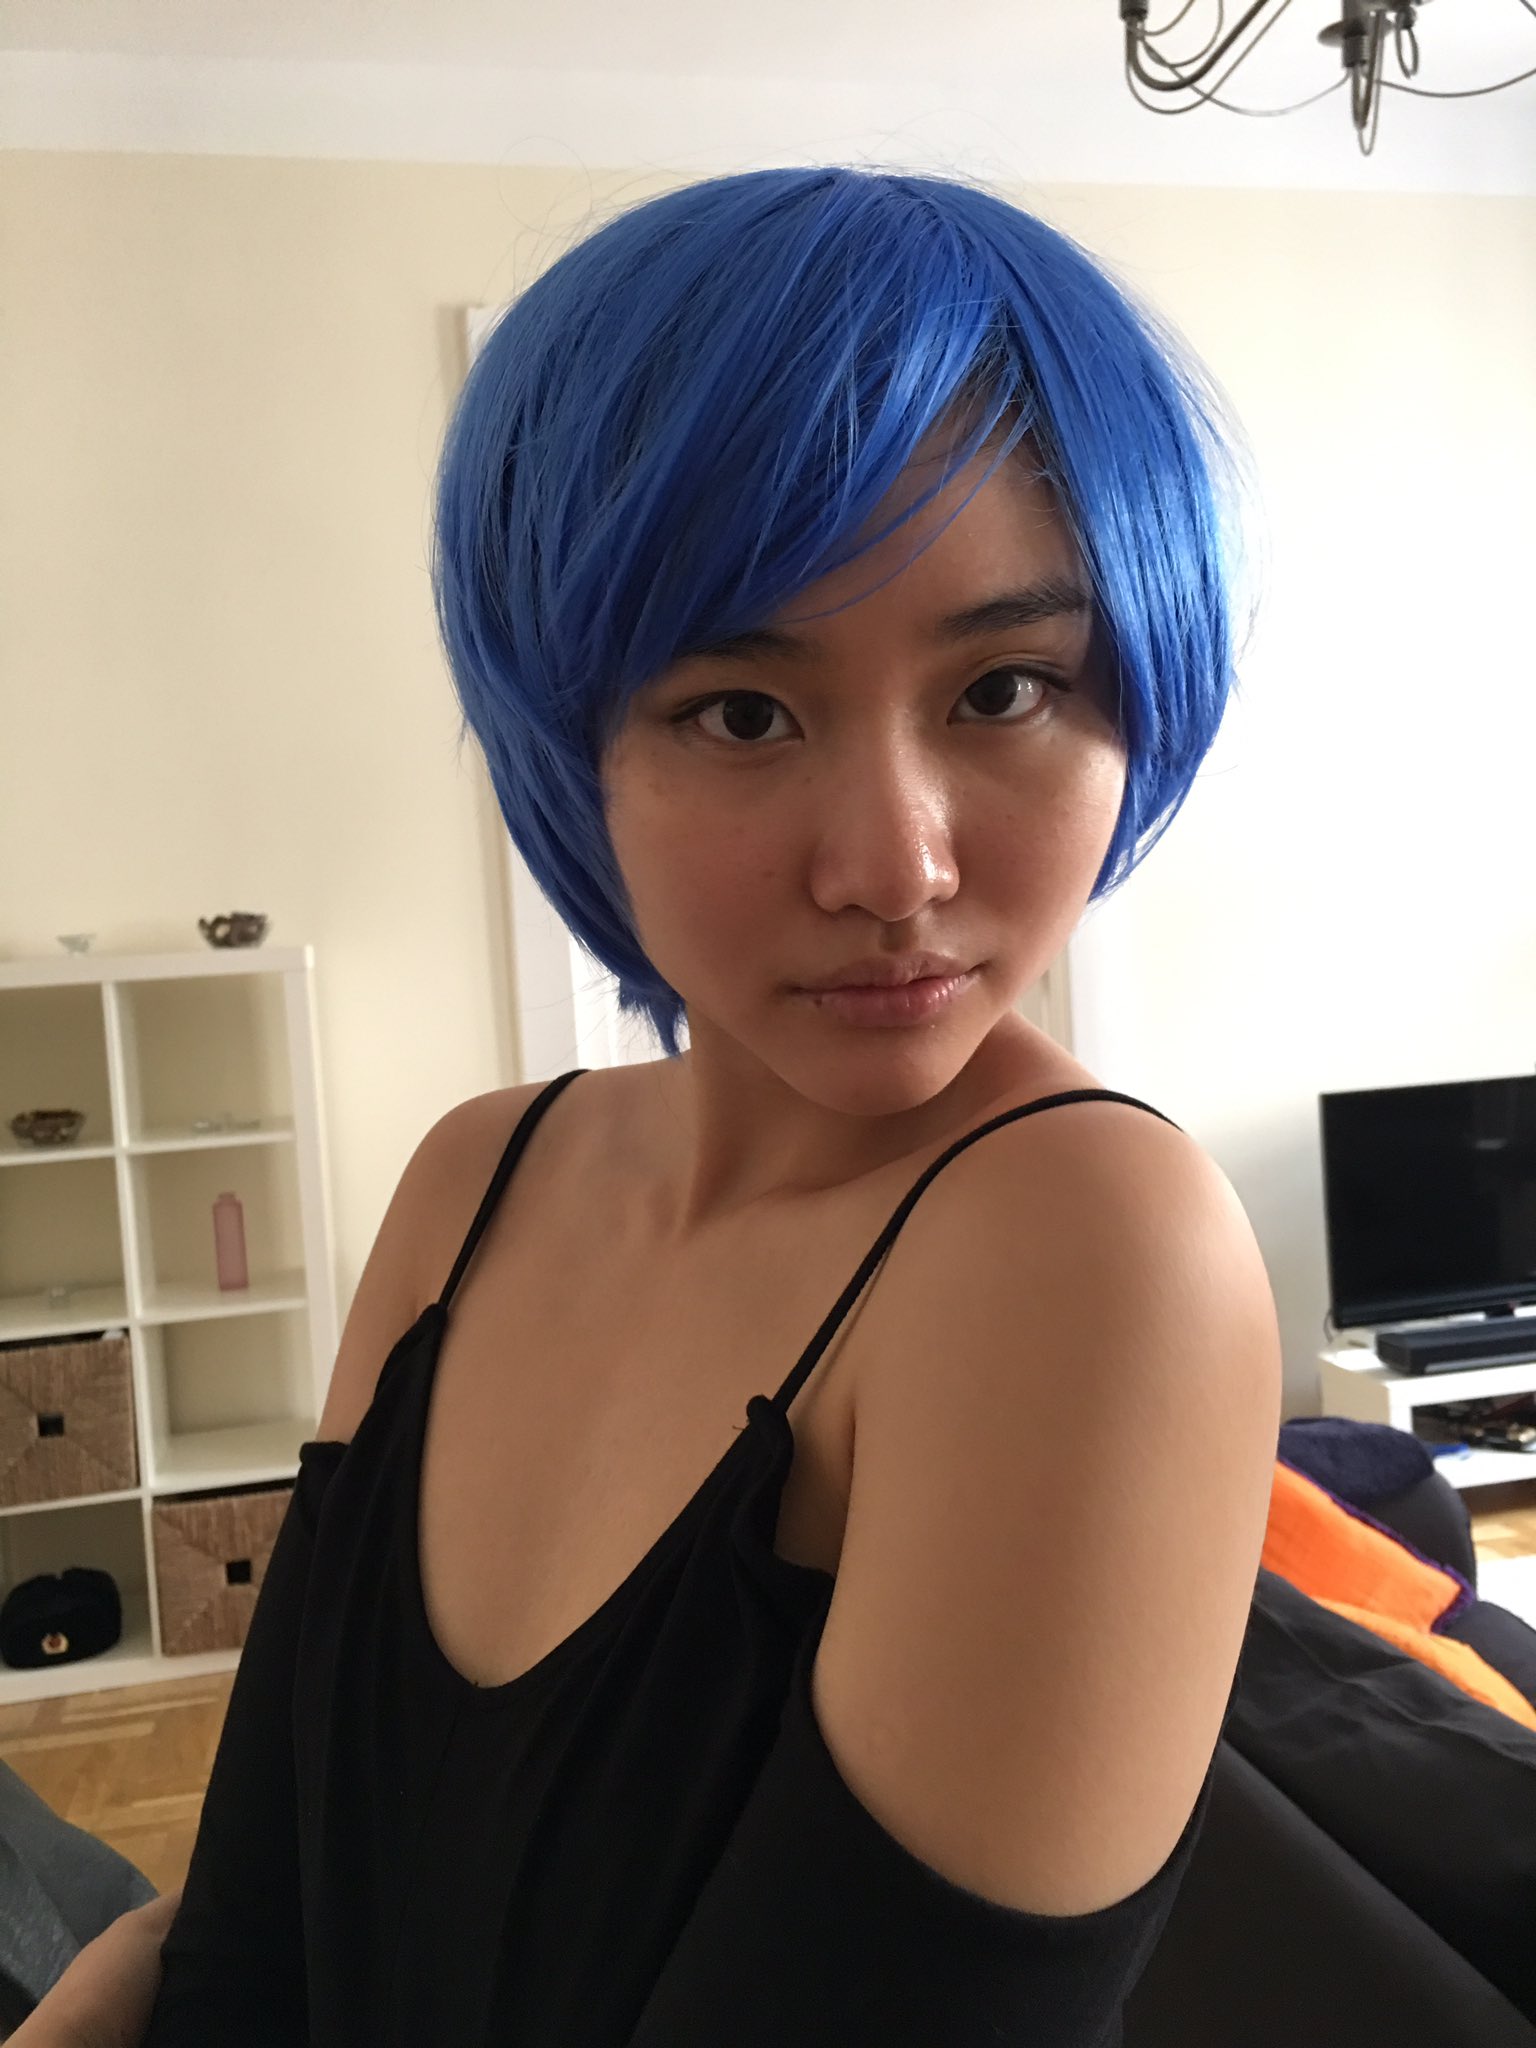 “Yumi wanted to try on some of my wigs 😉 which do you think suits her most...